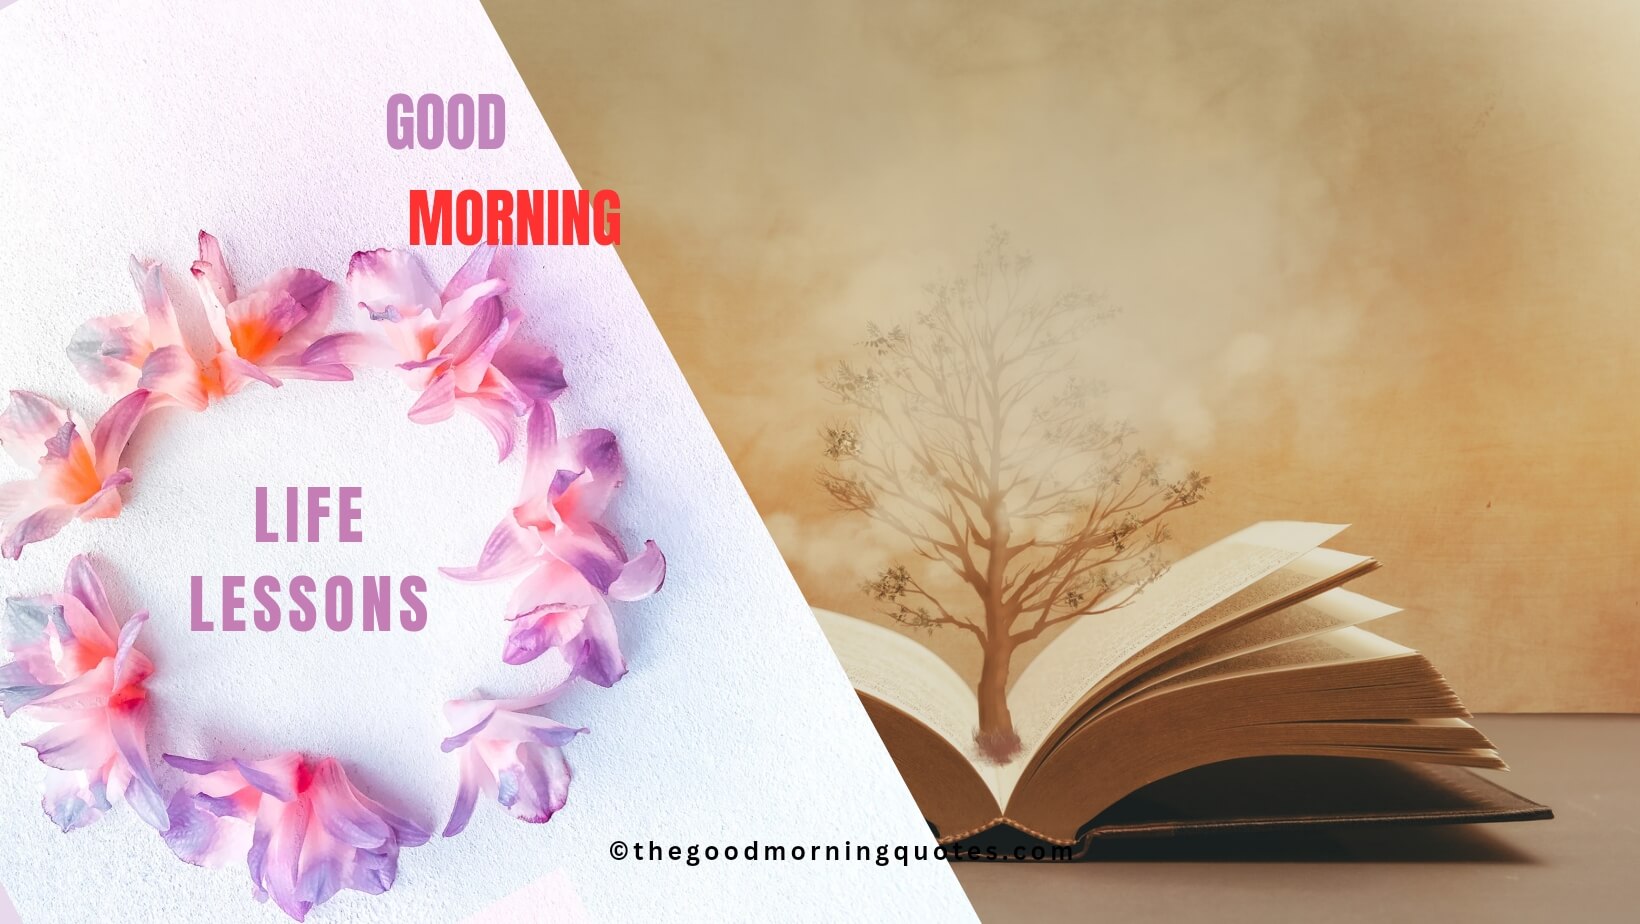 Good Morning Quotes for Life Lessons in Hindi